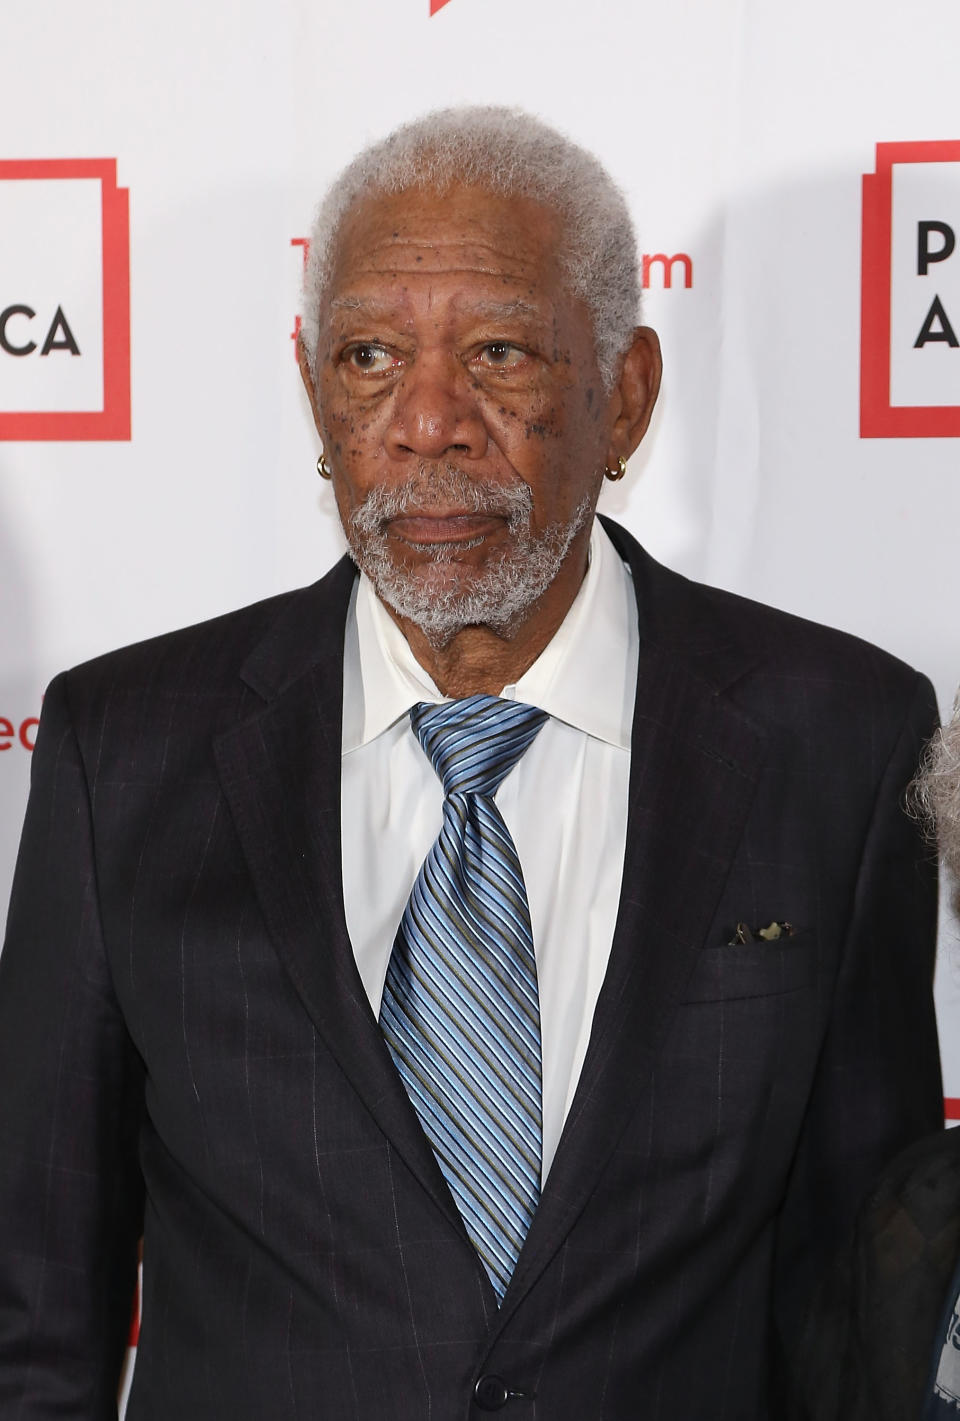 Morgan Freeman pictured here in New York City in May 2018. Source: Getty